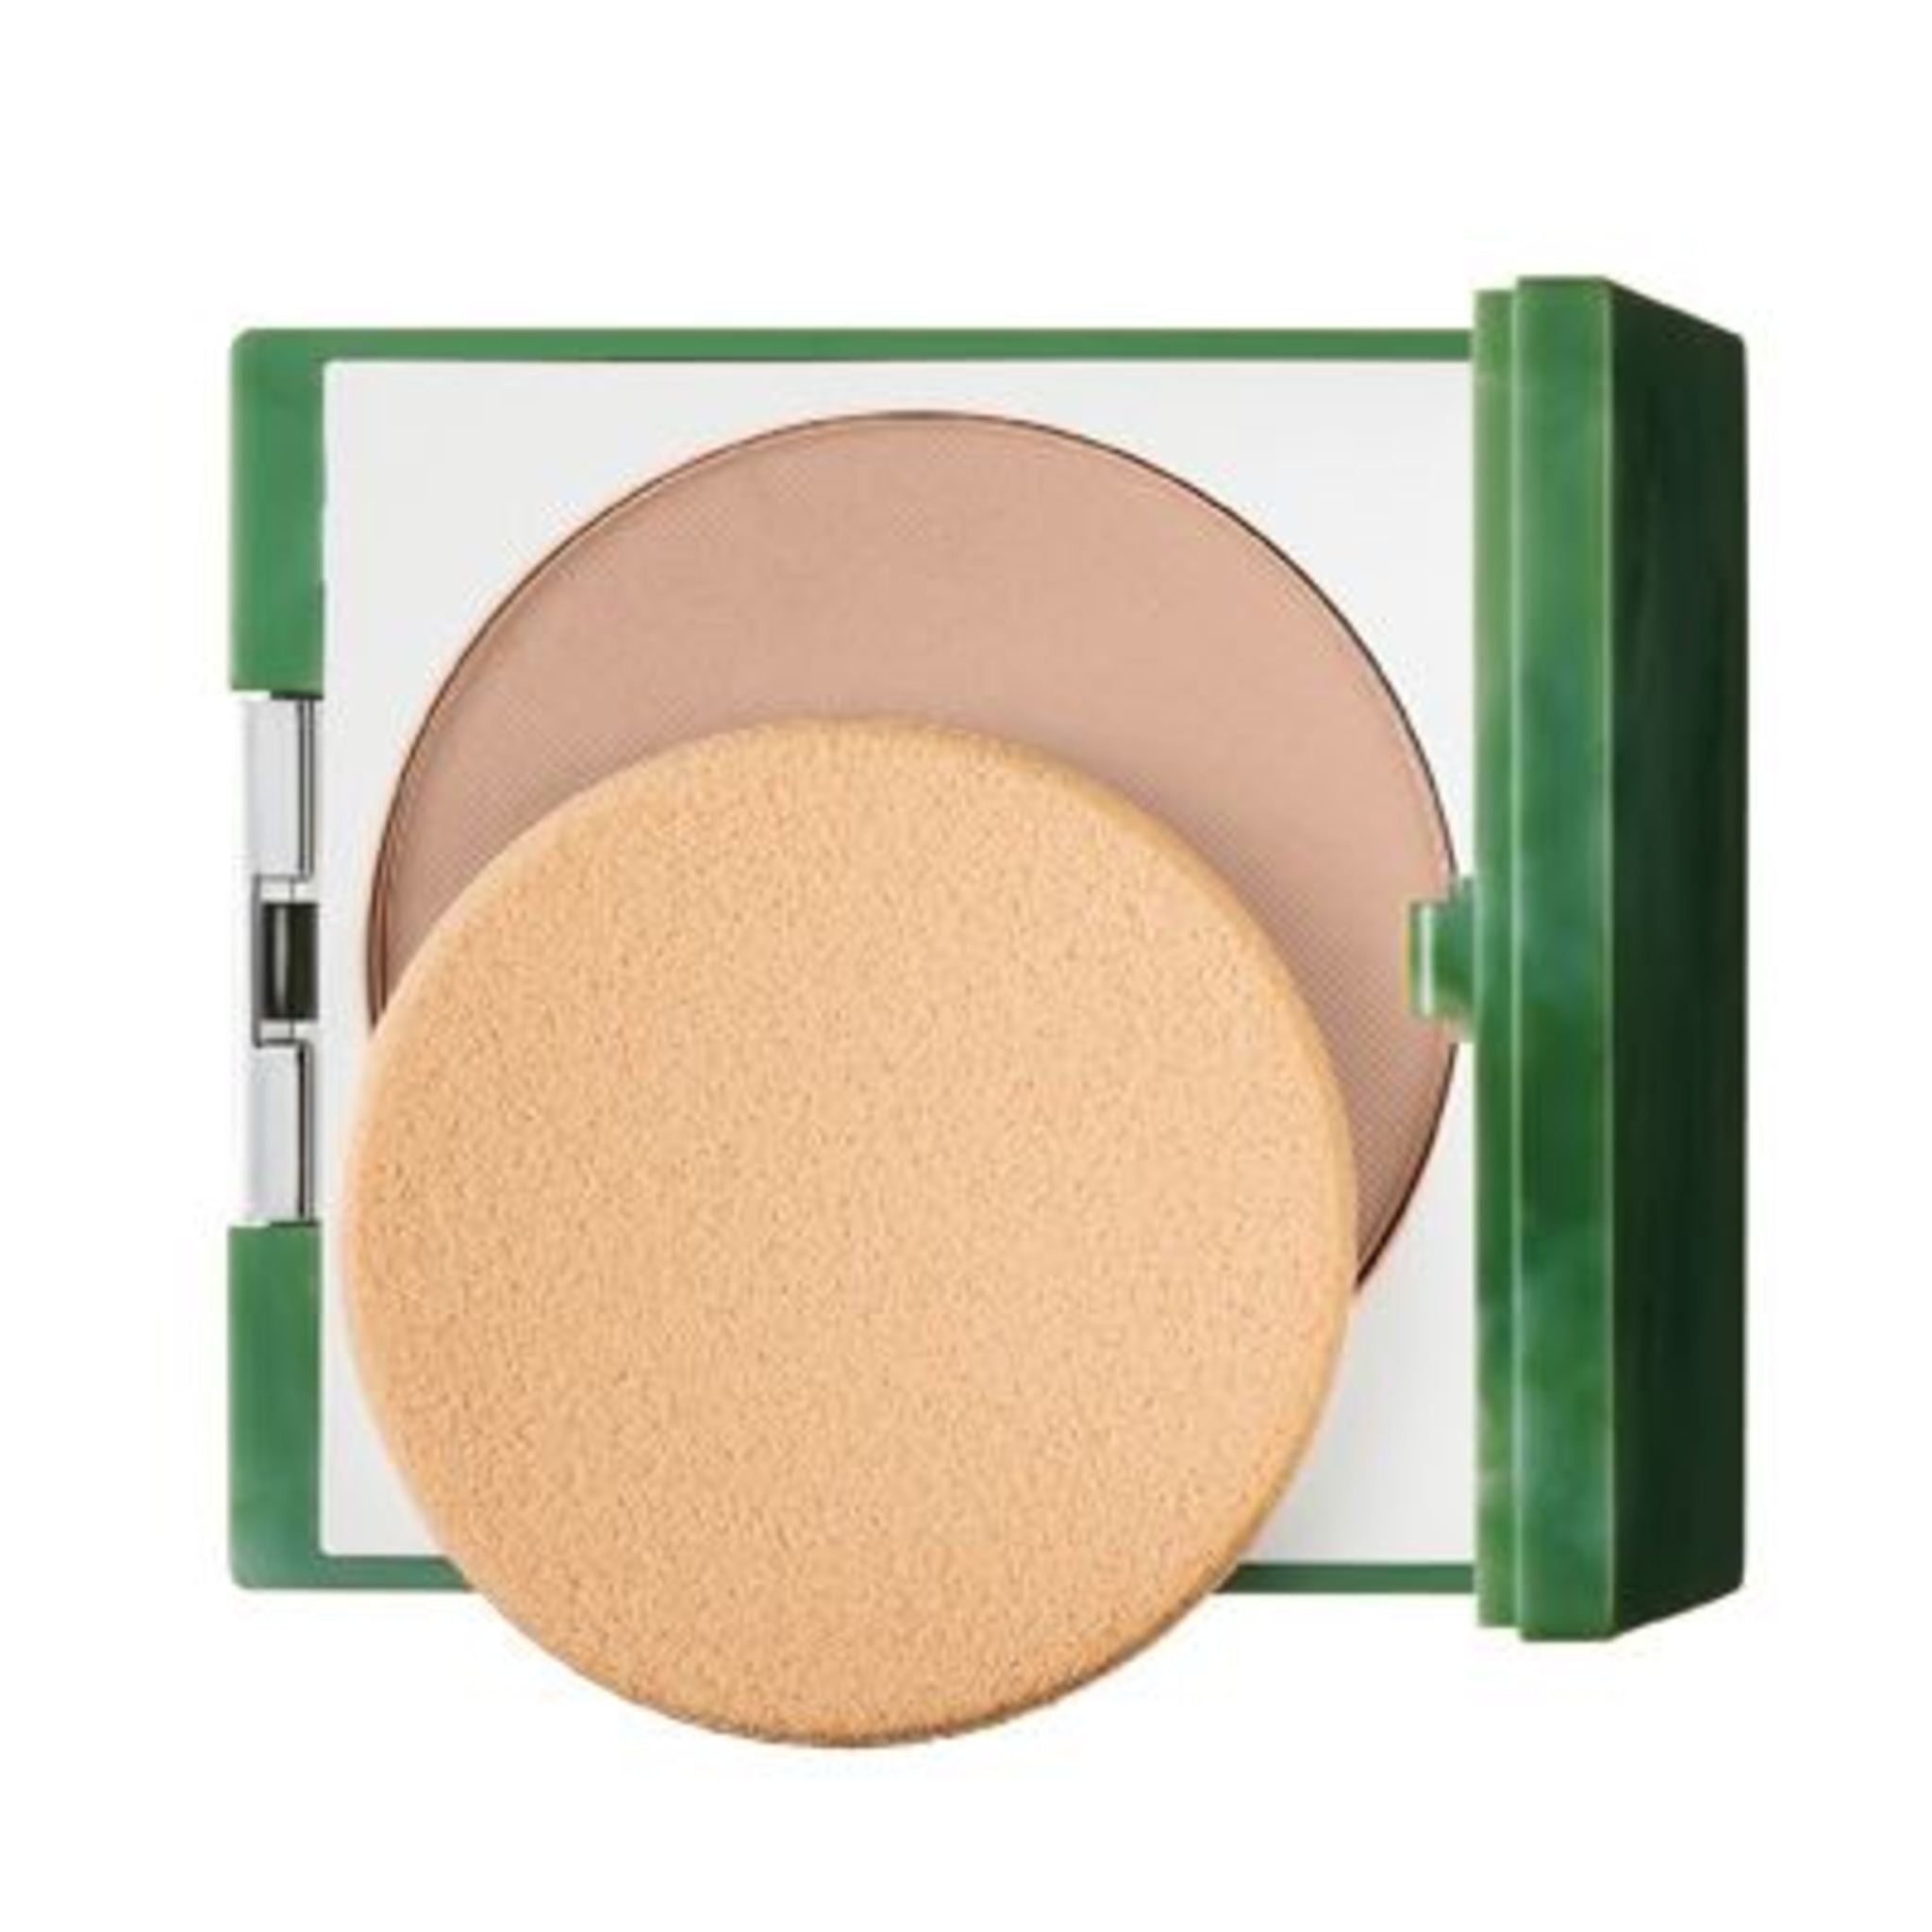 Superpowder Double Face Makeup main image.